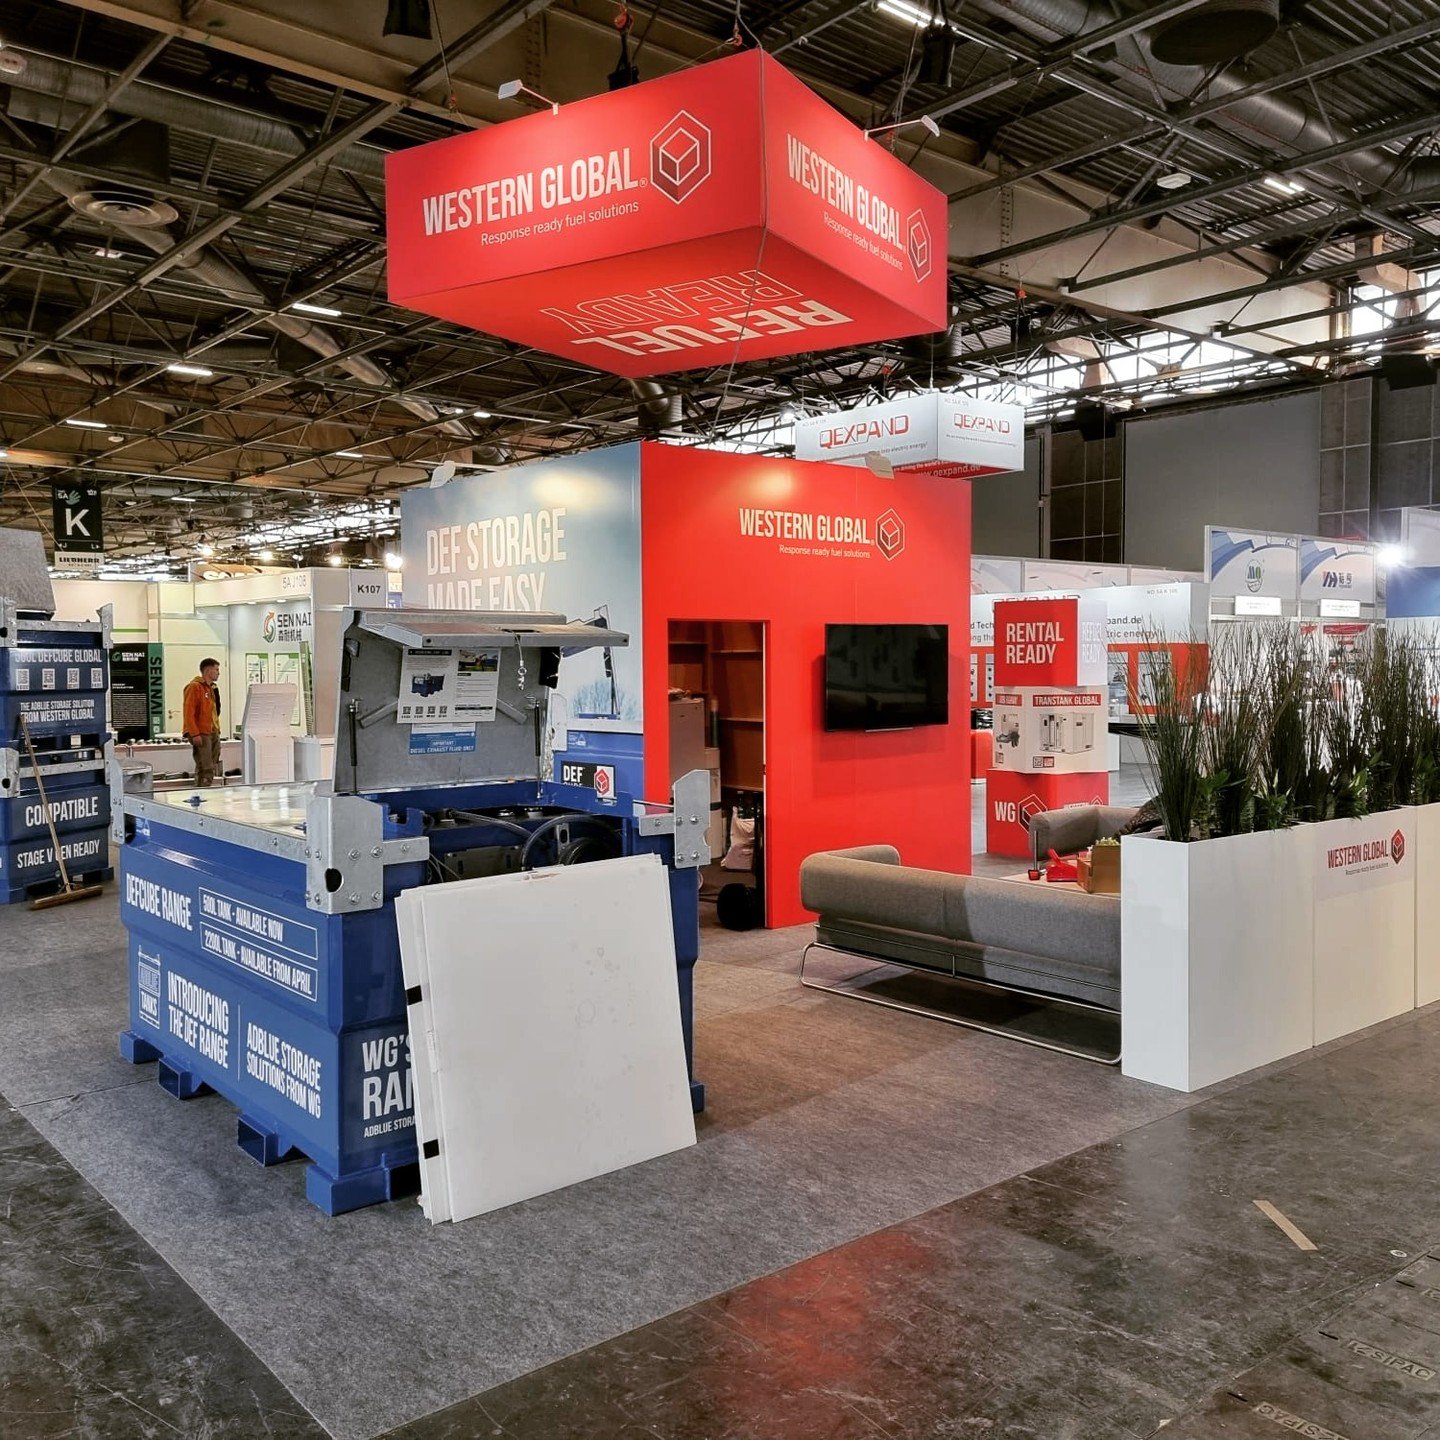 The Sustainable Construction Solutions and Technology exhibition has started today, and we're sure you'll agree that this Western Global stand is looking pretty slick!

Well done to our fantastic team of carpenters, and a huge thank you to our client